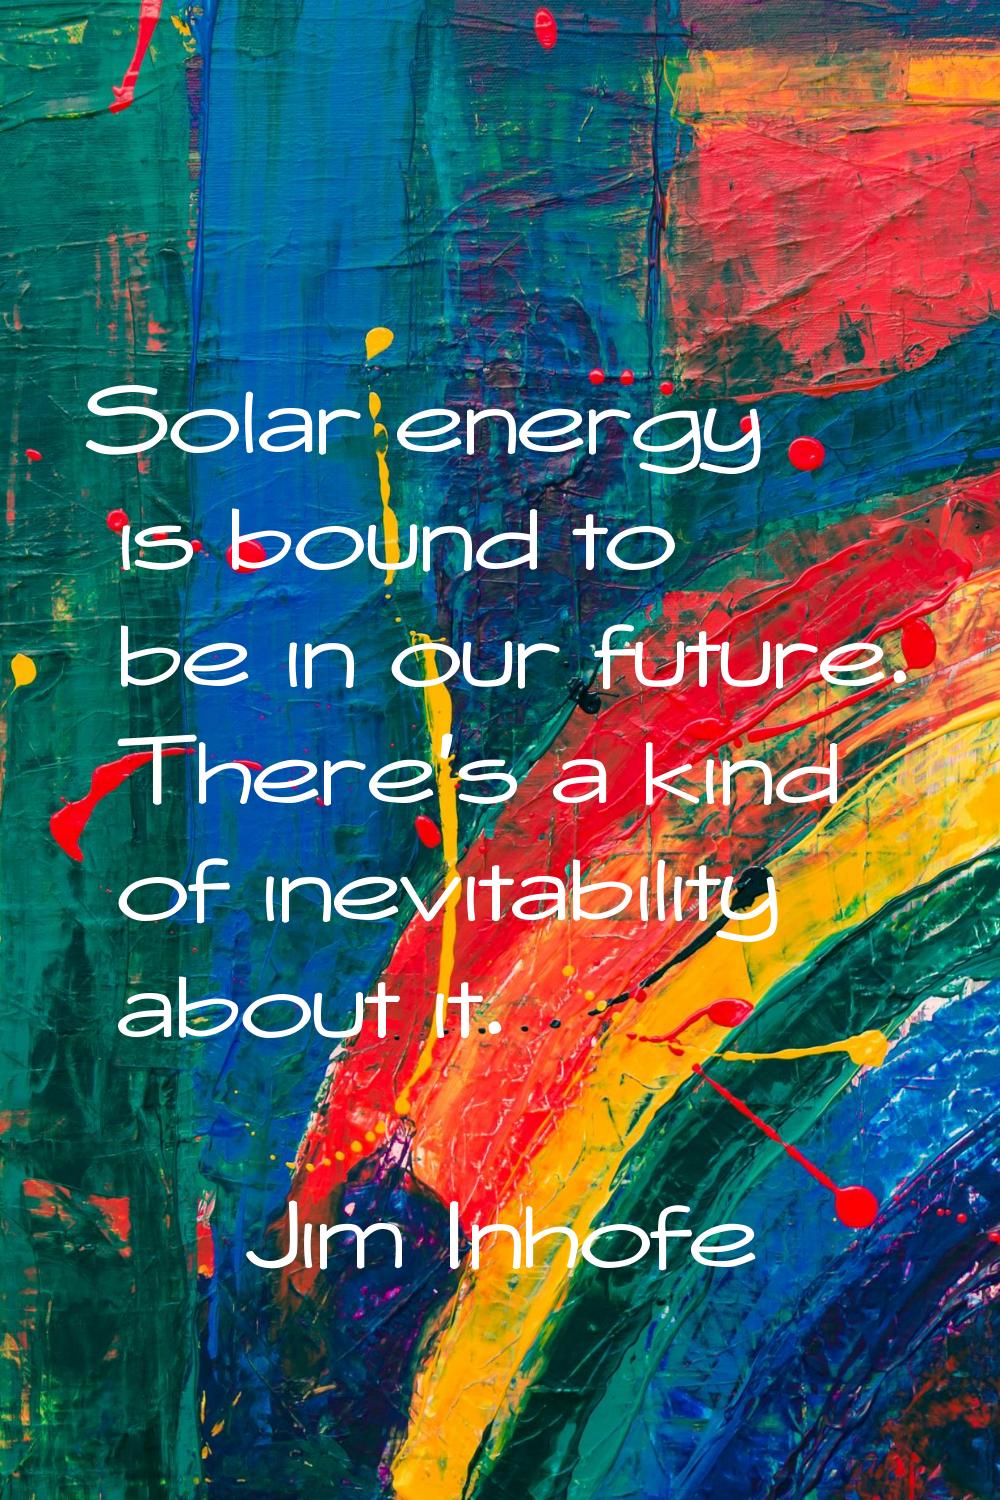 Solar energy is bound to be in our future. There's a kind of inevitability about it.